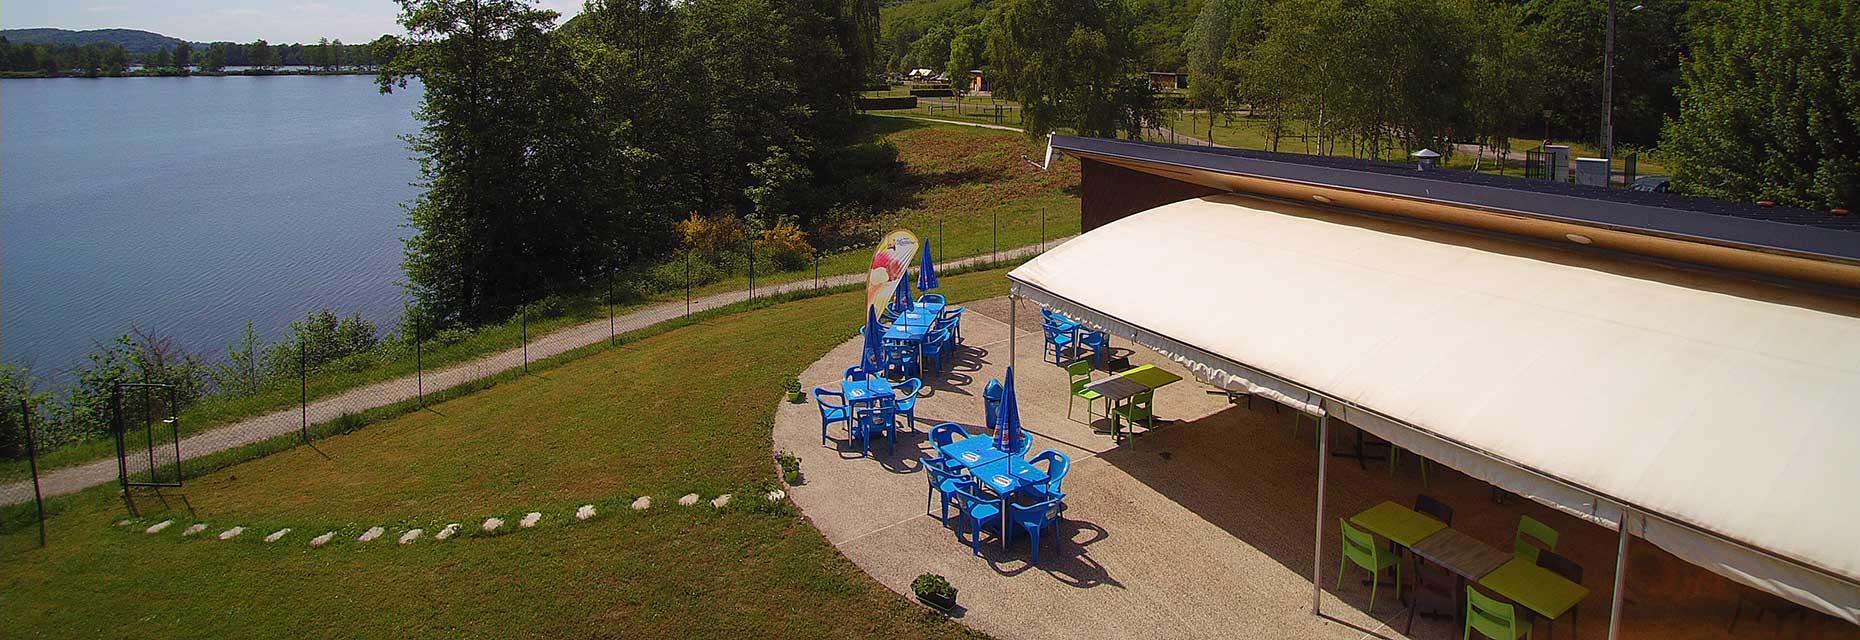 General view of the Titan bar-restaurant at the Campsite Les Ballastières in the Southern Vosges